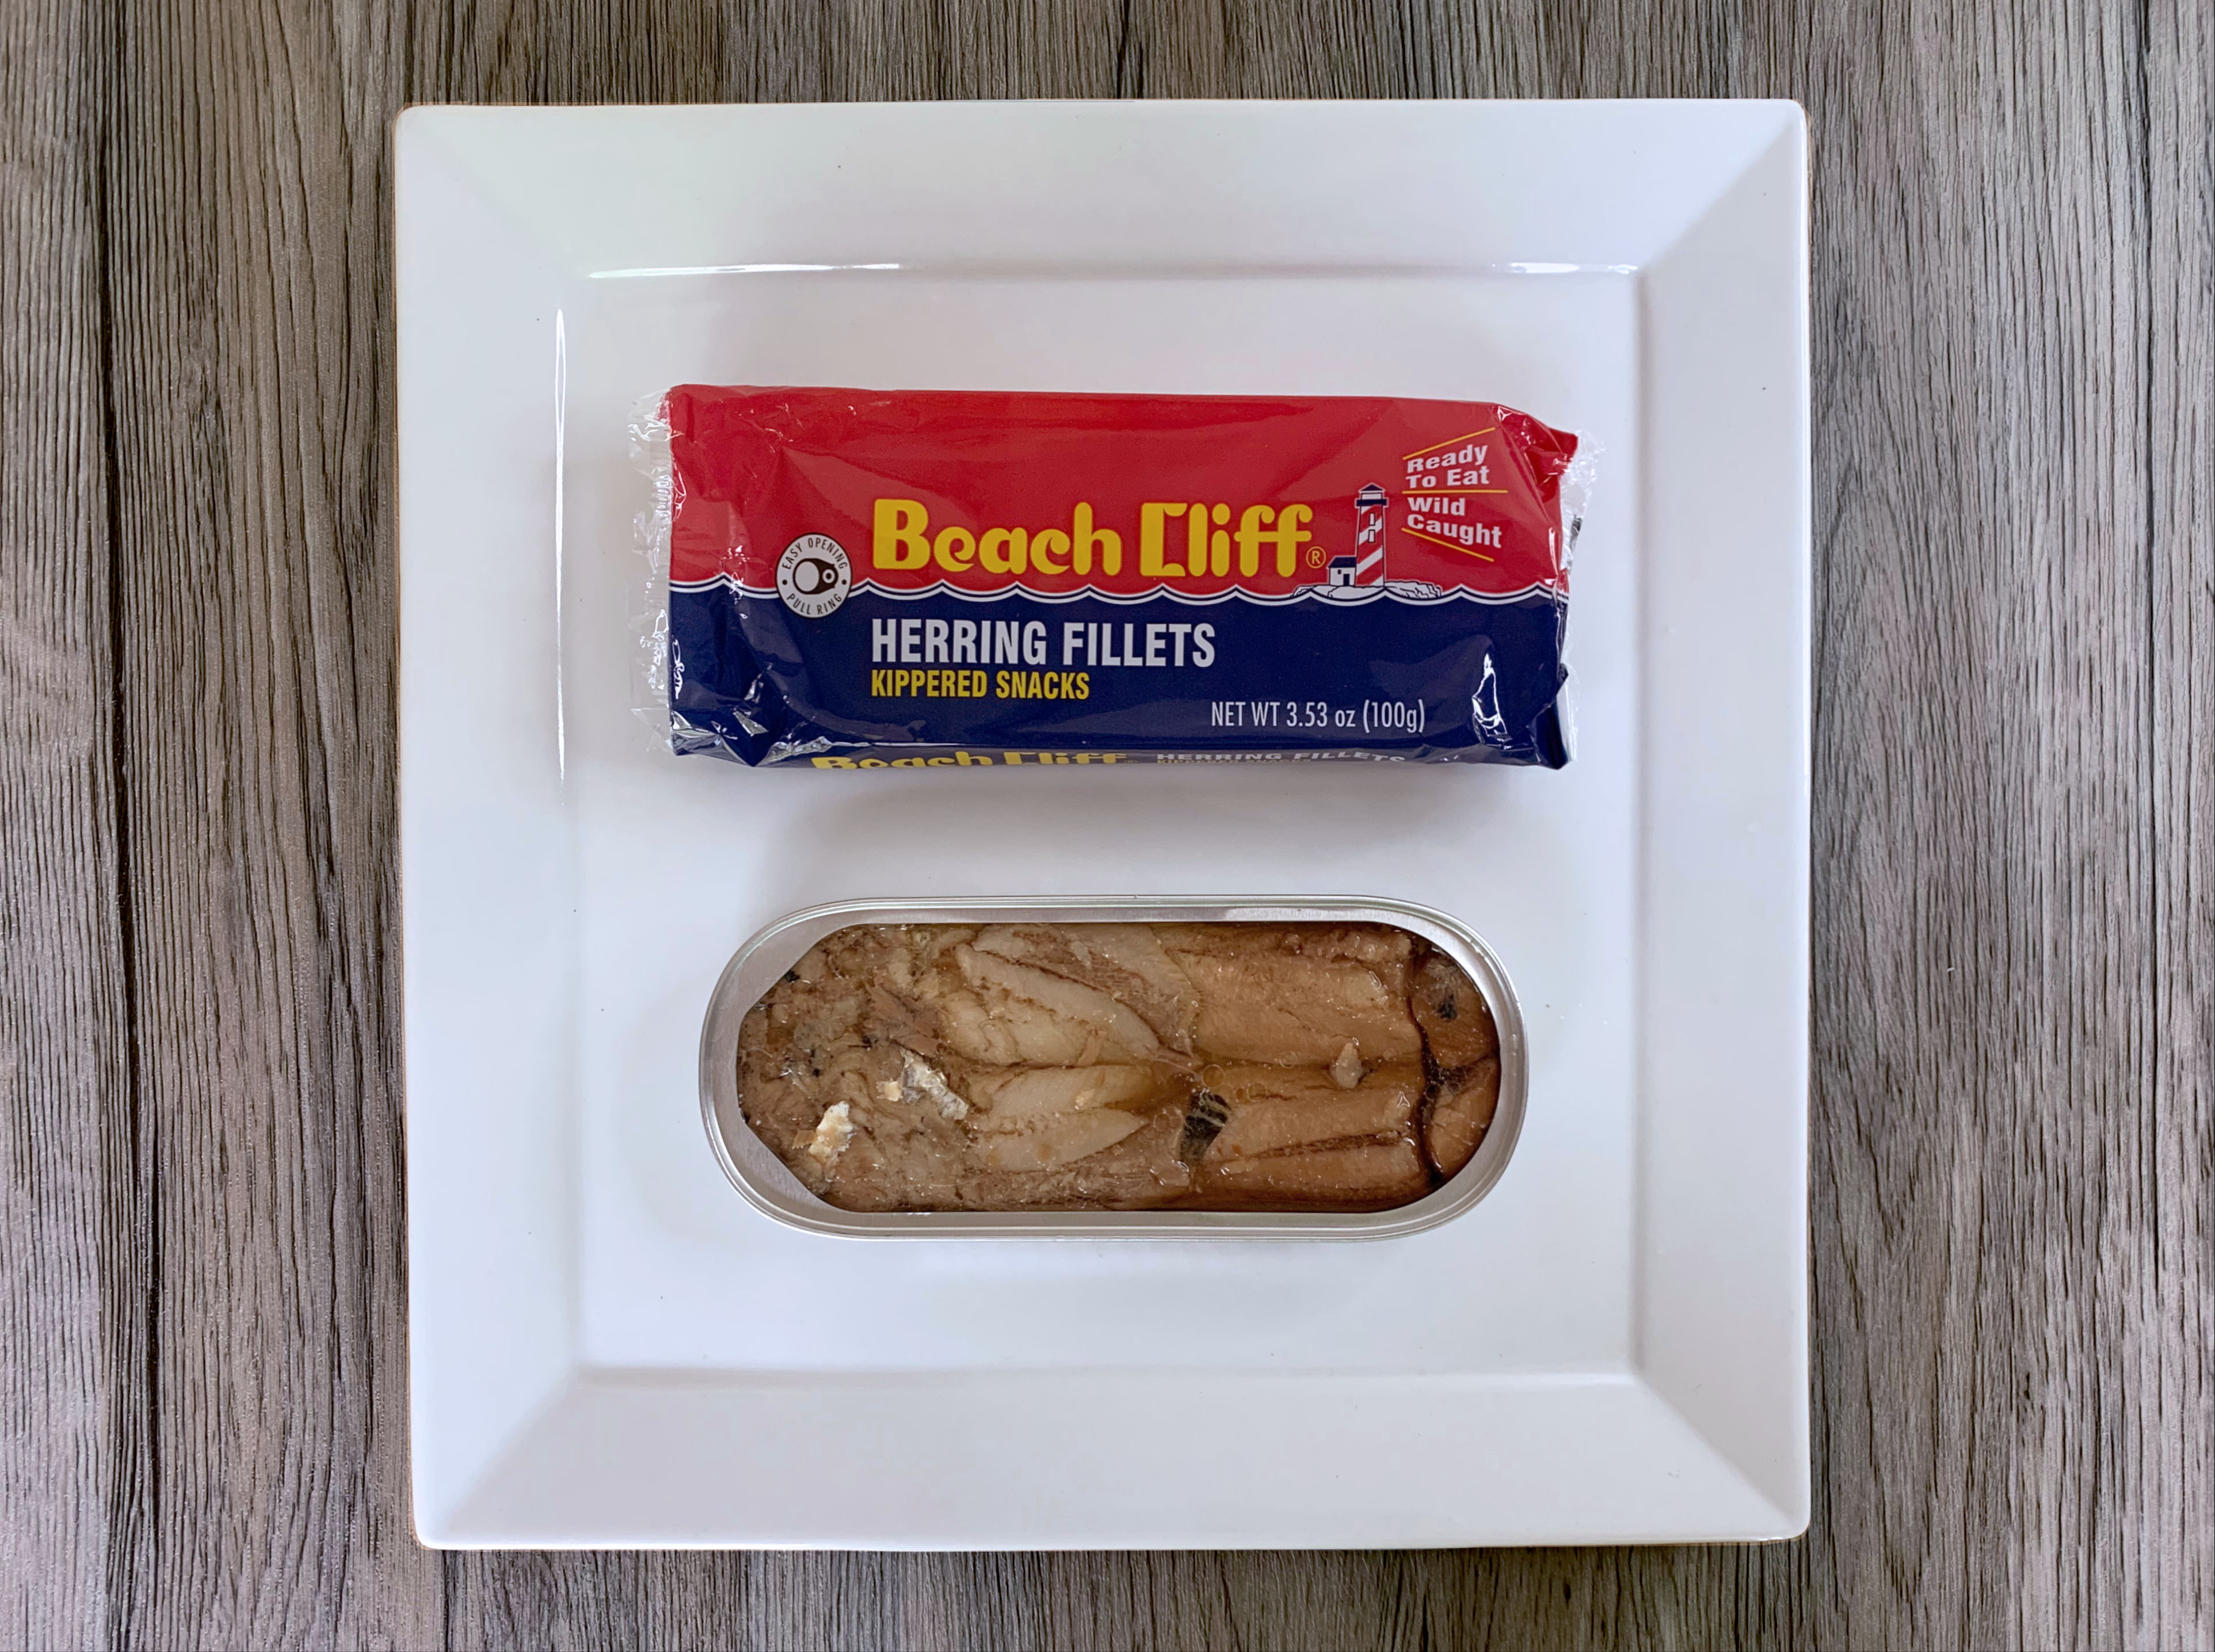 Read Beach Cliff Herring Fillets Review